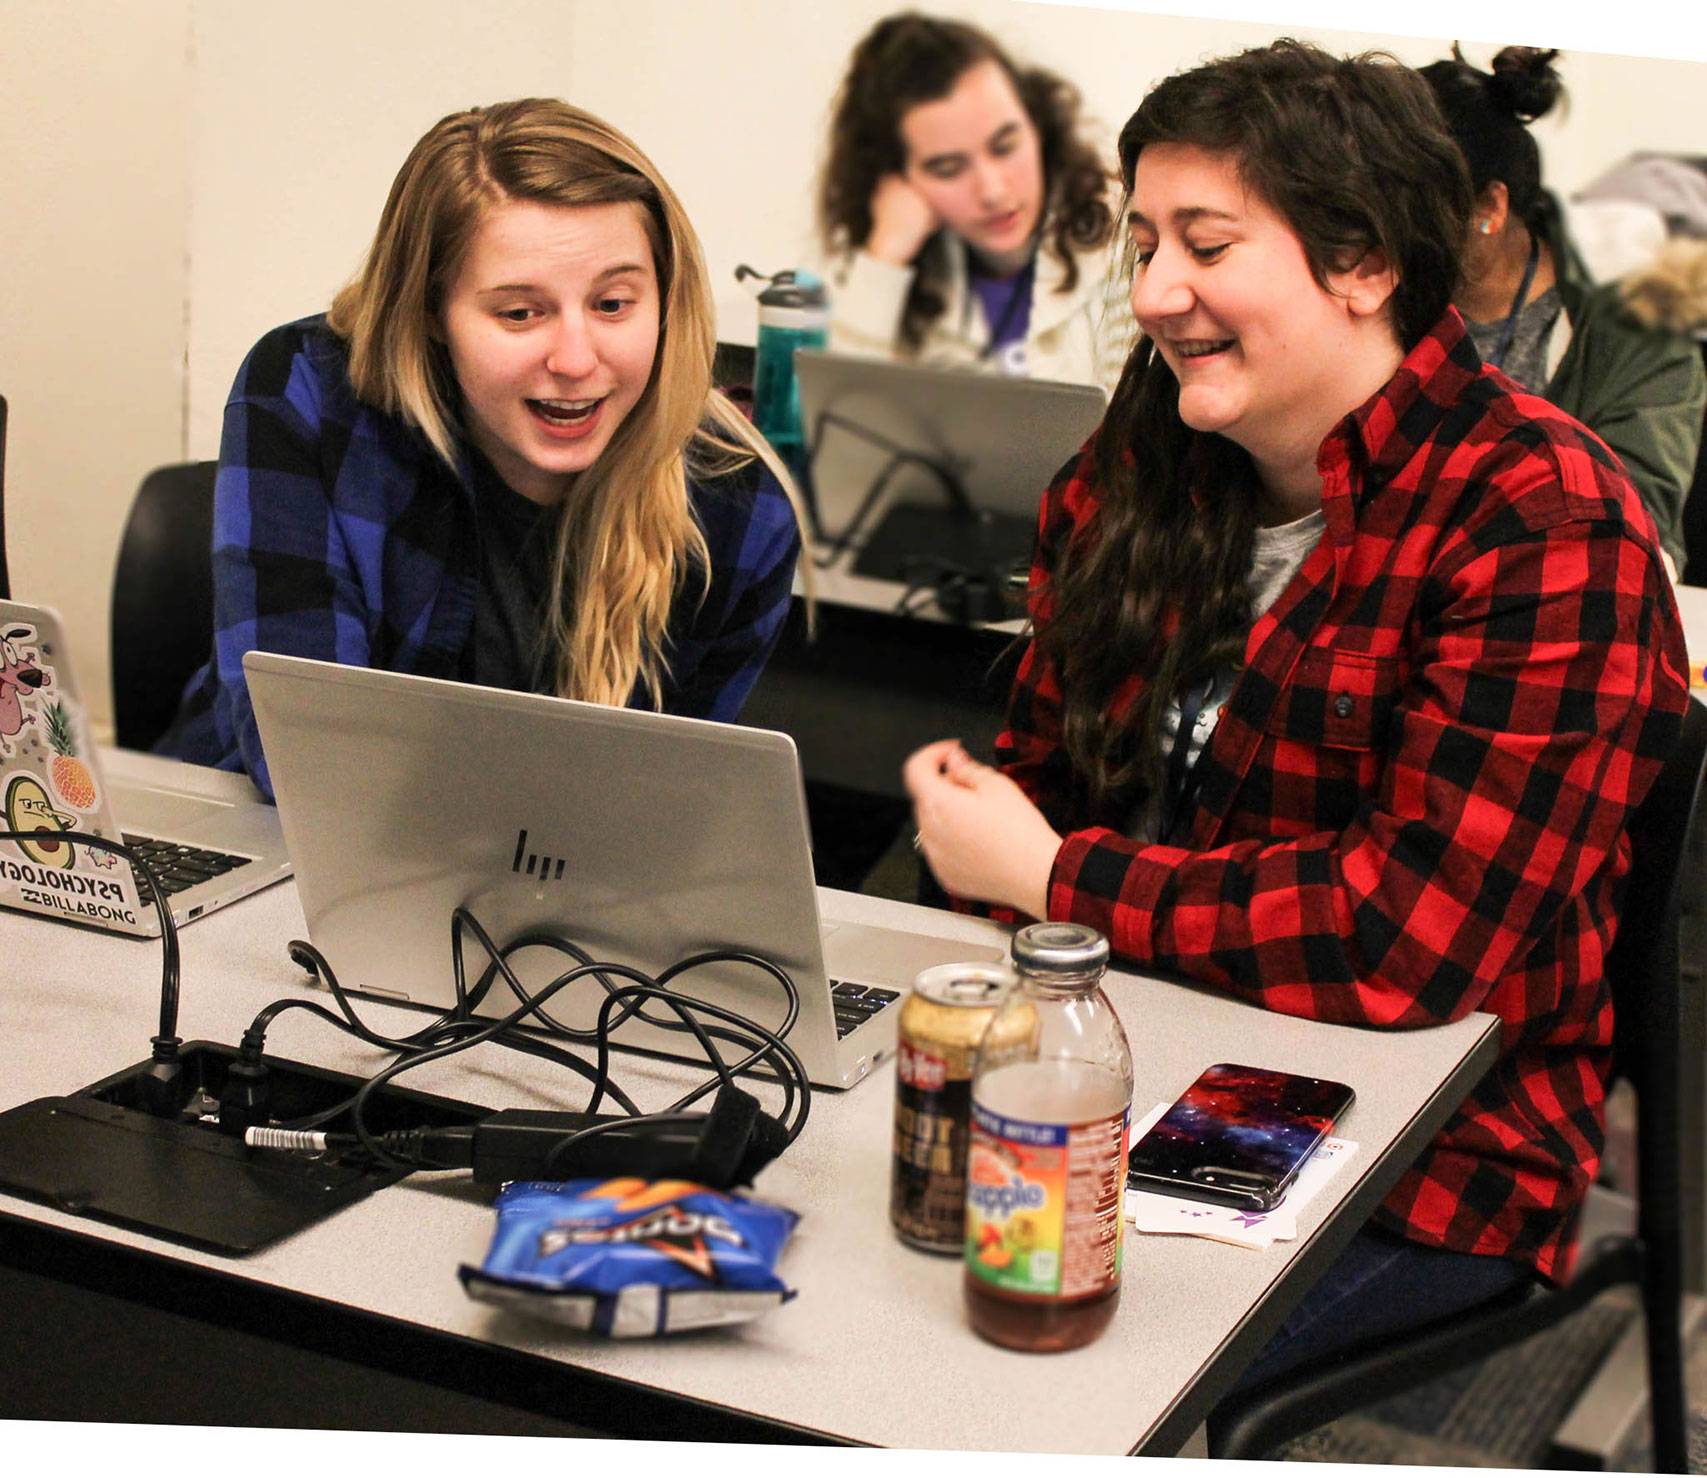 Two girls working on a project together at the WSU Hackathon event on campus.